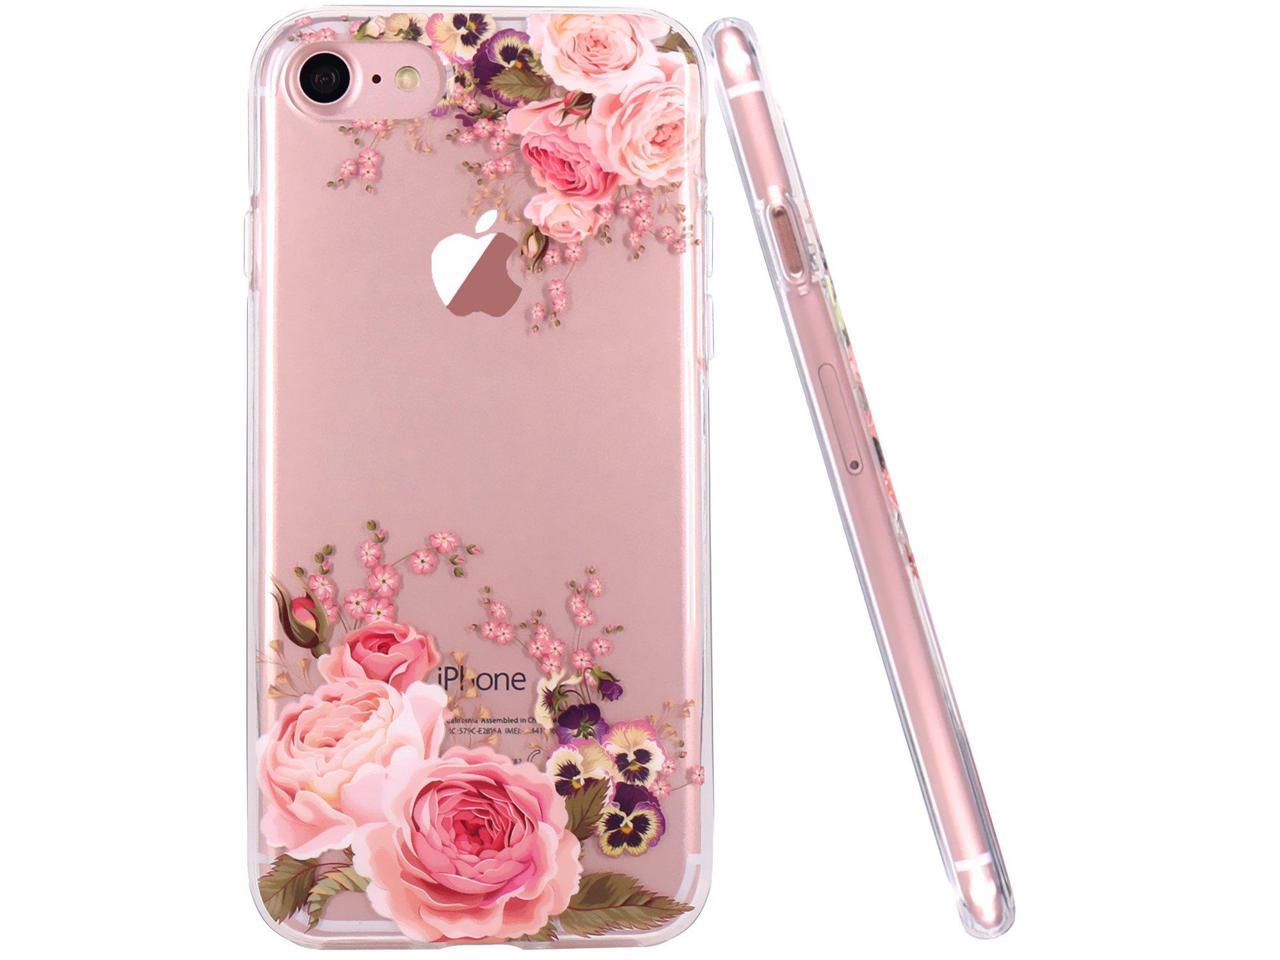 Jaholan Iphone 6 Case Iphone 6s Case Girl Floral Clear Tpu Soft Slim Flexible Silicone Cover Phone Case For Iphone 6 Iphone 6s Rose Flower Newegg Com